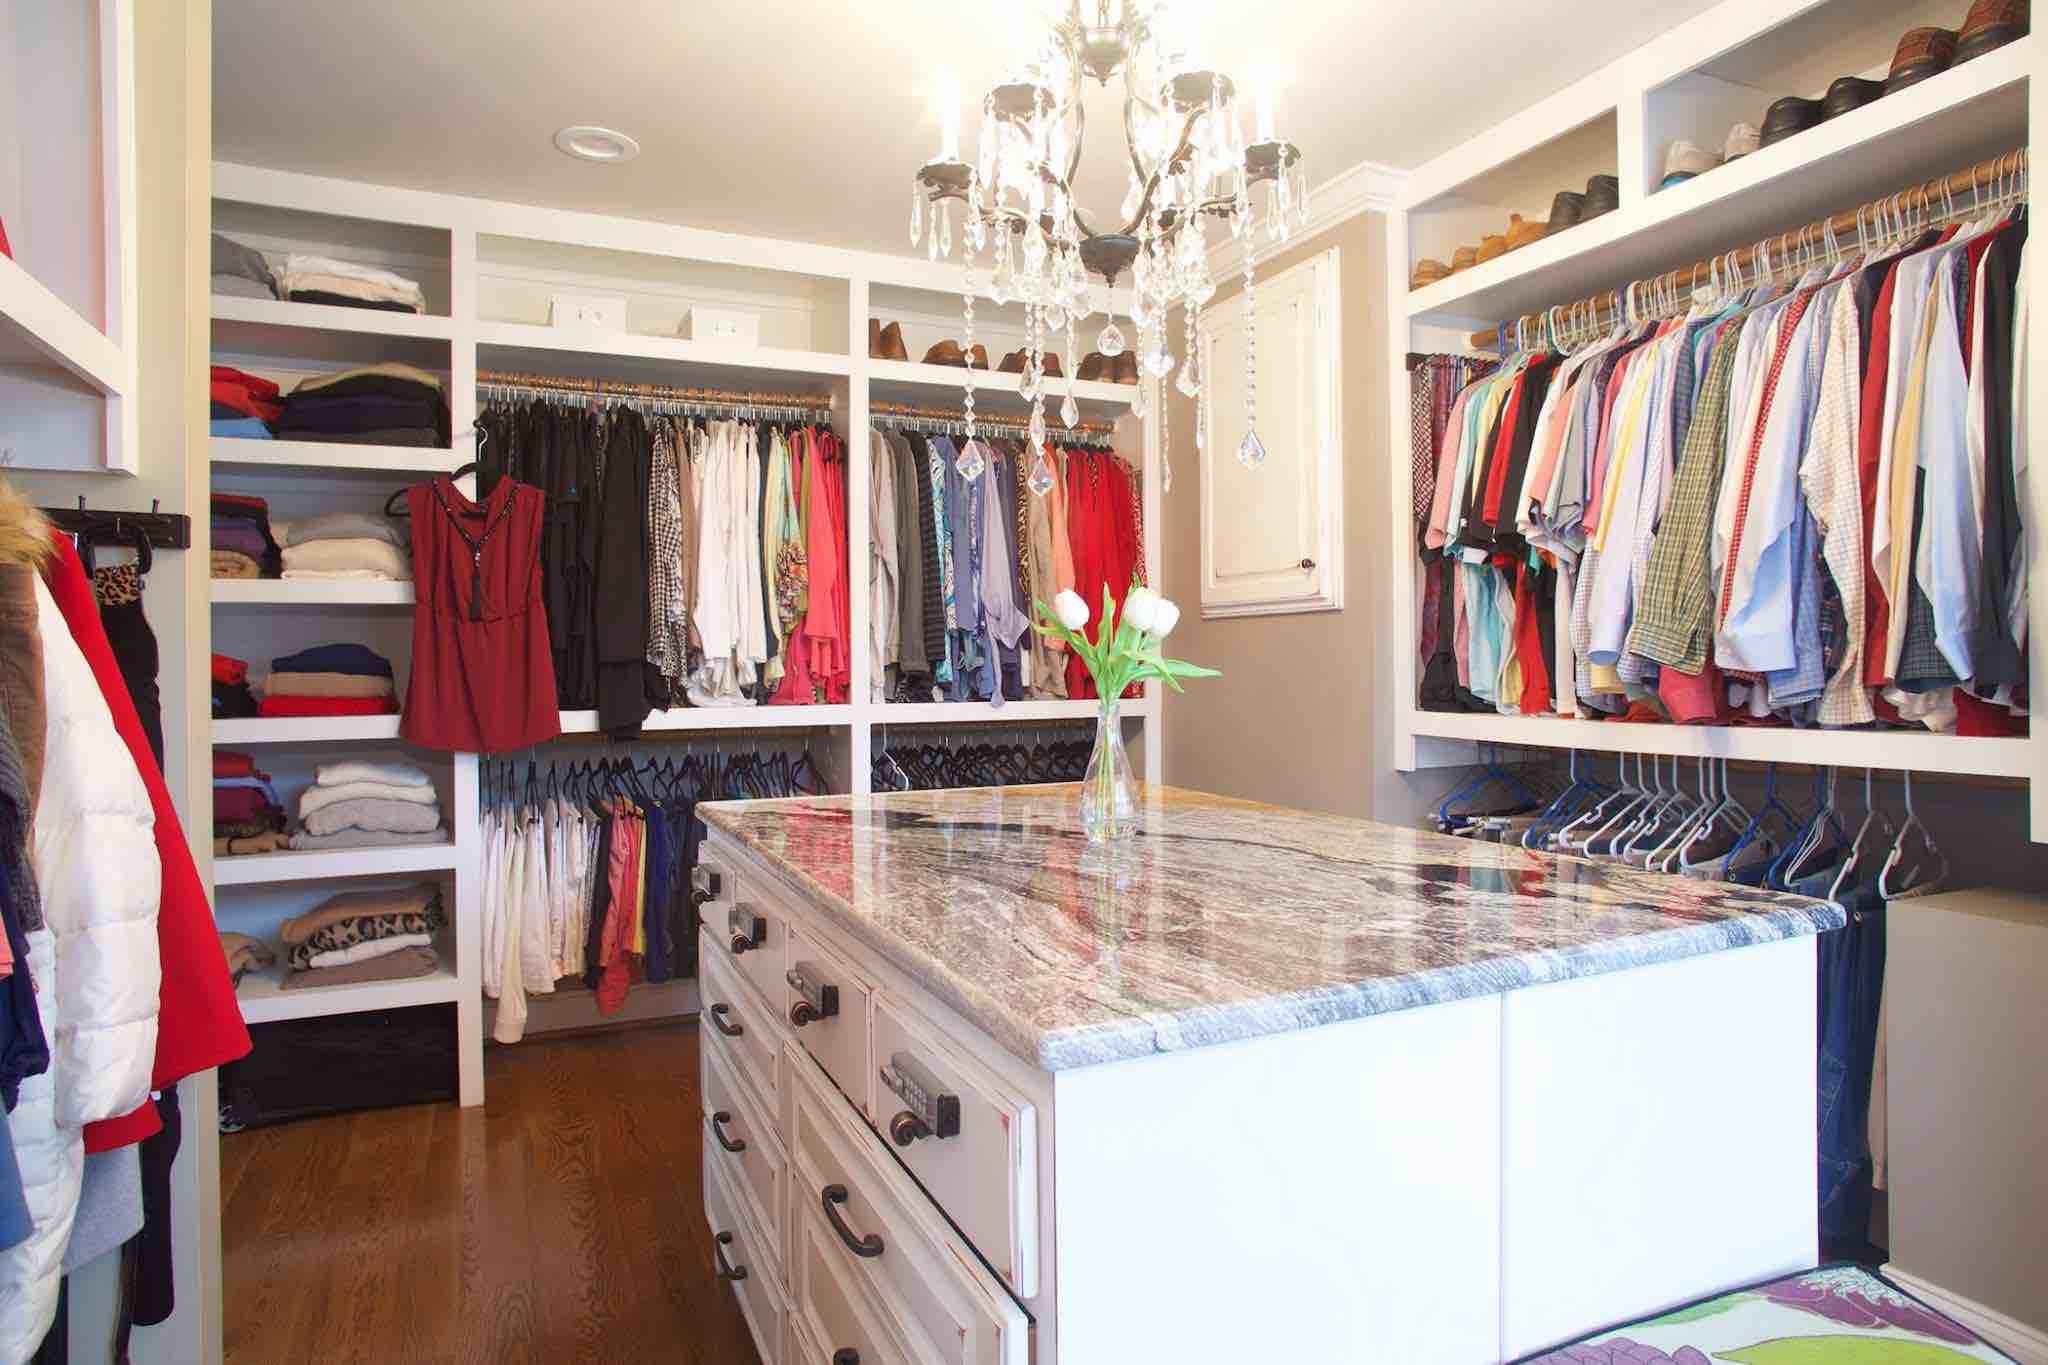 180 Spaces | Interior Design Turnarounds - Master Closet with custom island, keyed entry jewelry drawers & a sexy little black chandelier!